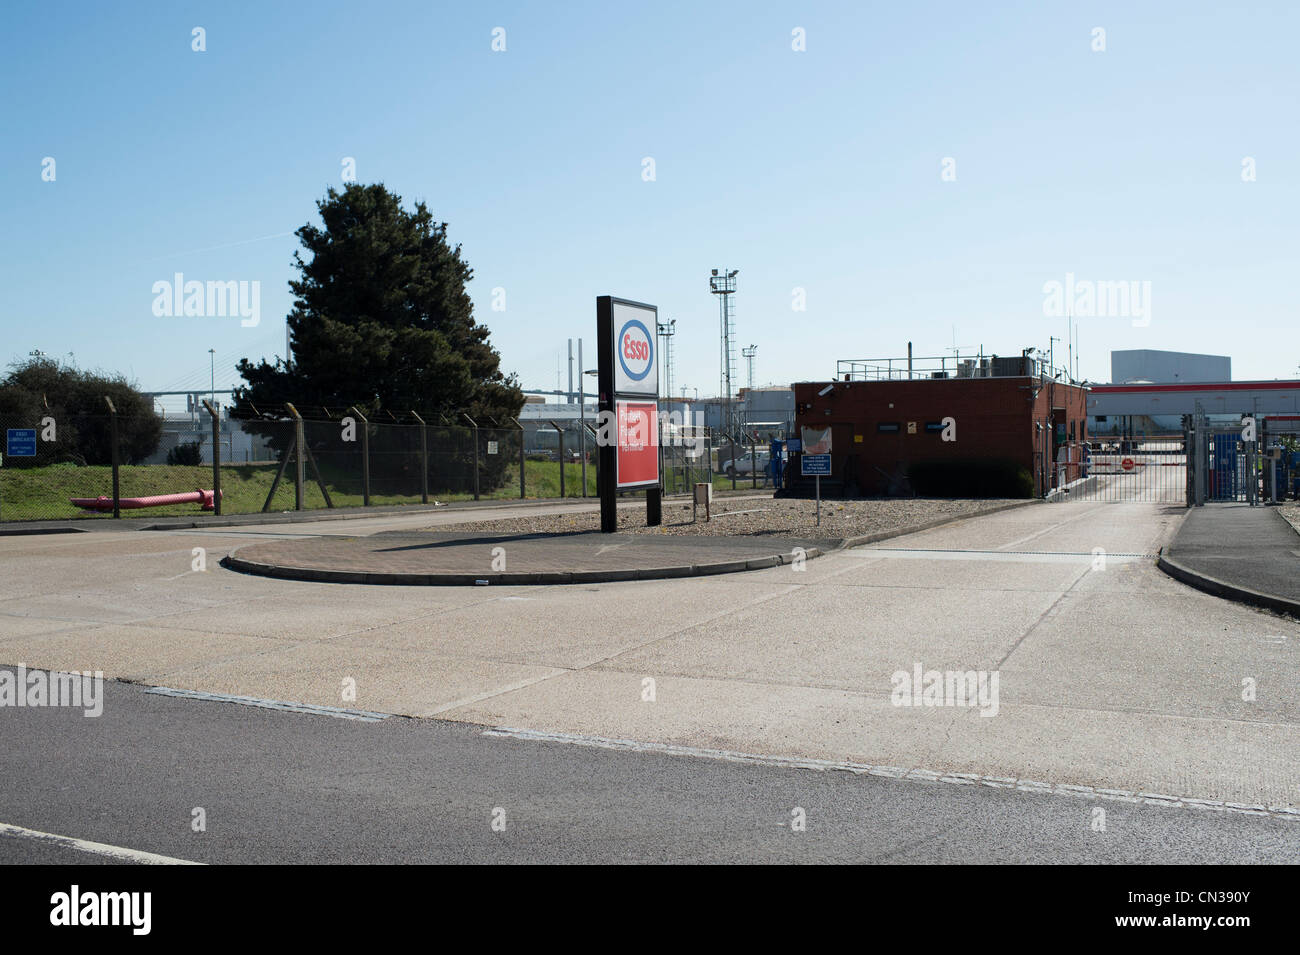 The entrance to the Esso fuel tanker depot in London Road, Purfleet, Essex. This site was part of the 2000 fuel dispute. Stock Photo